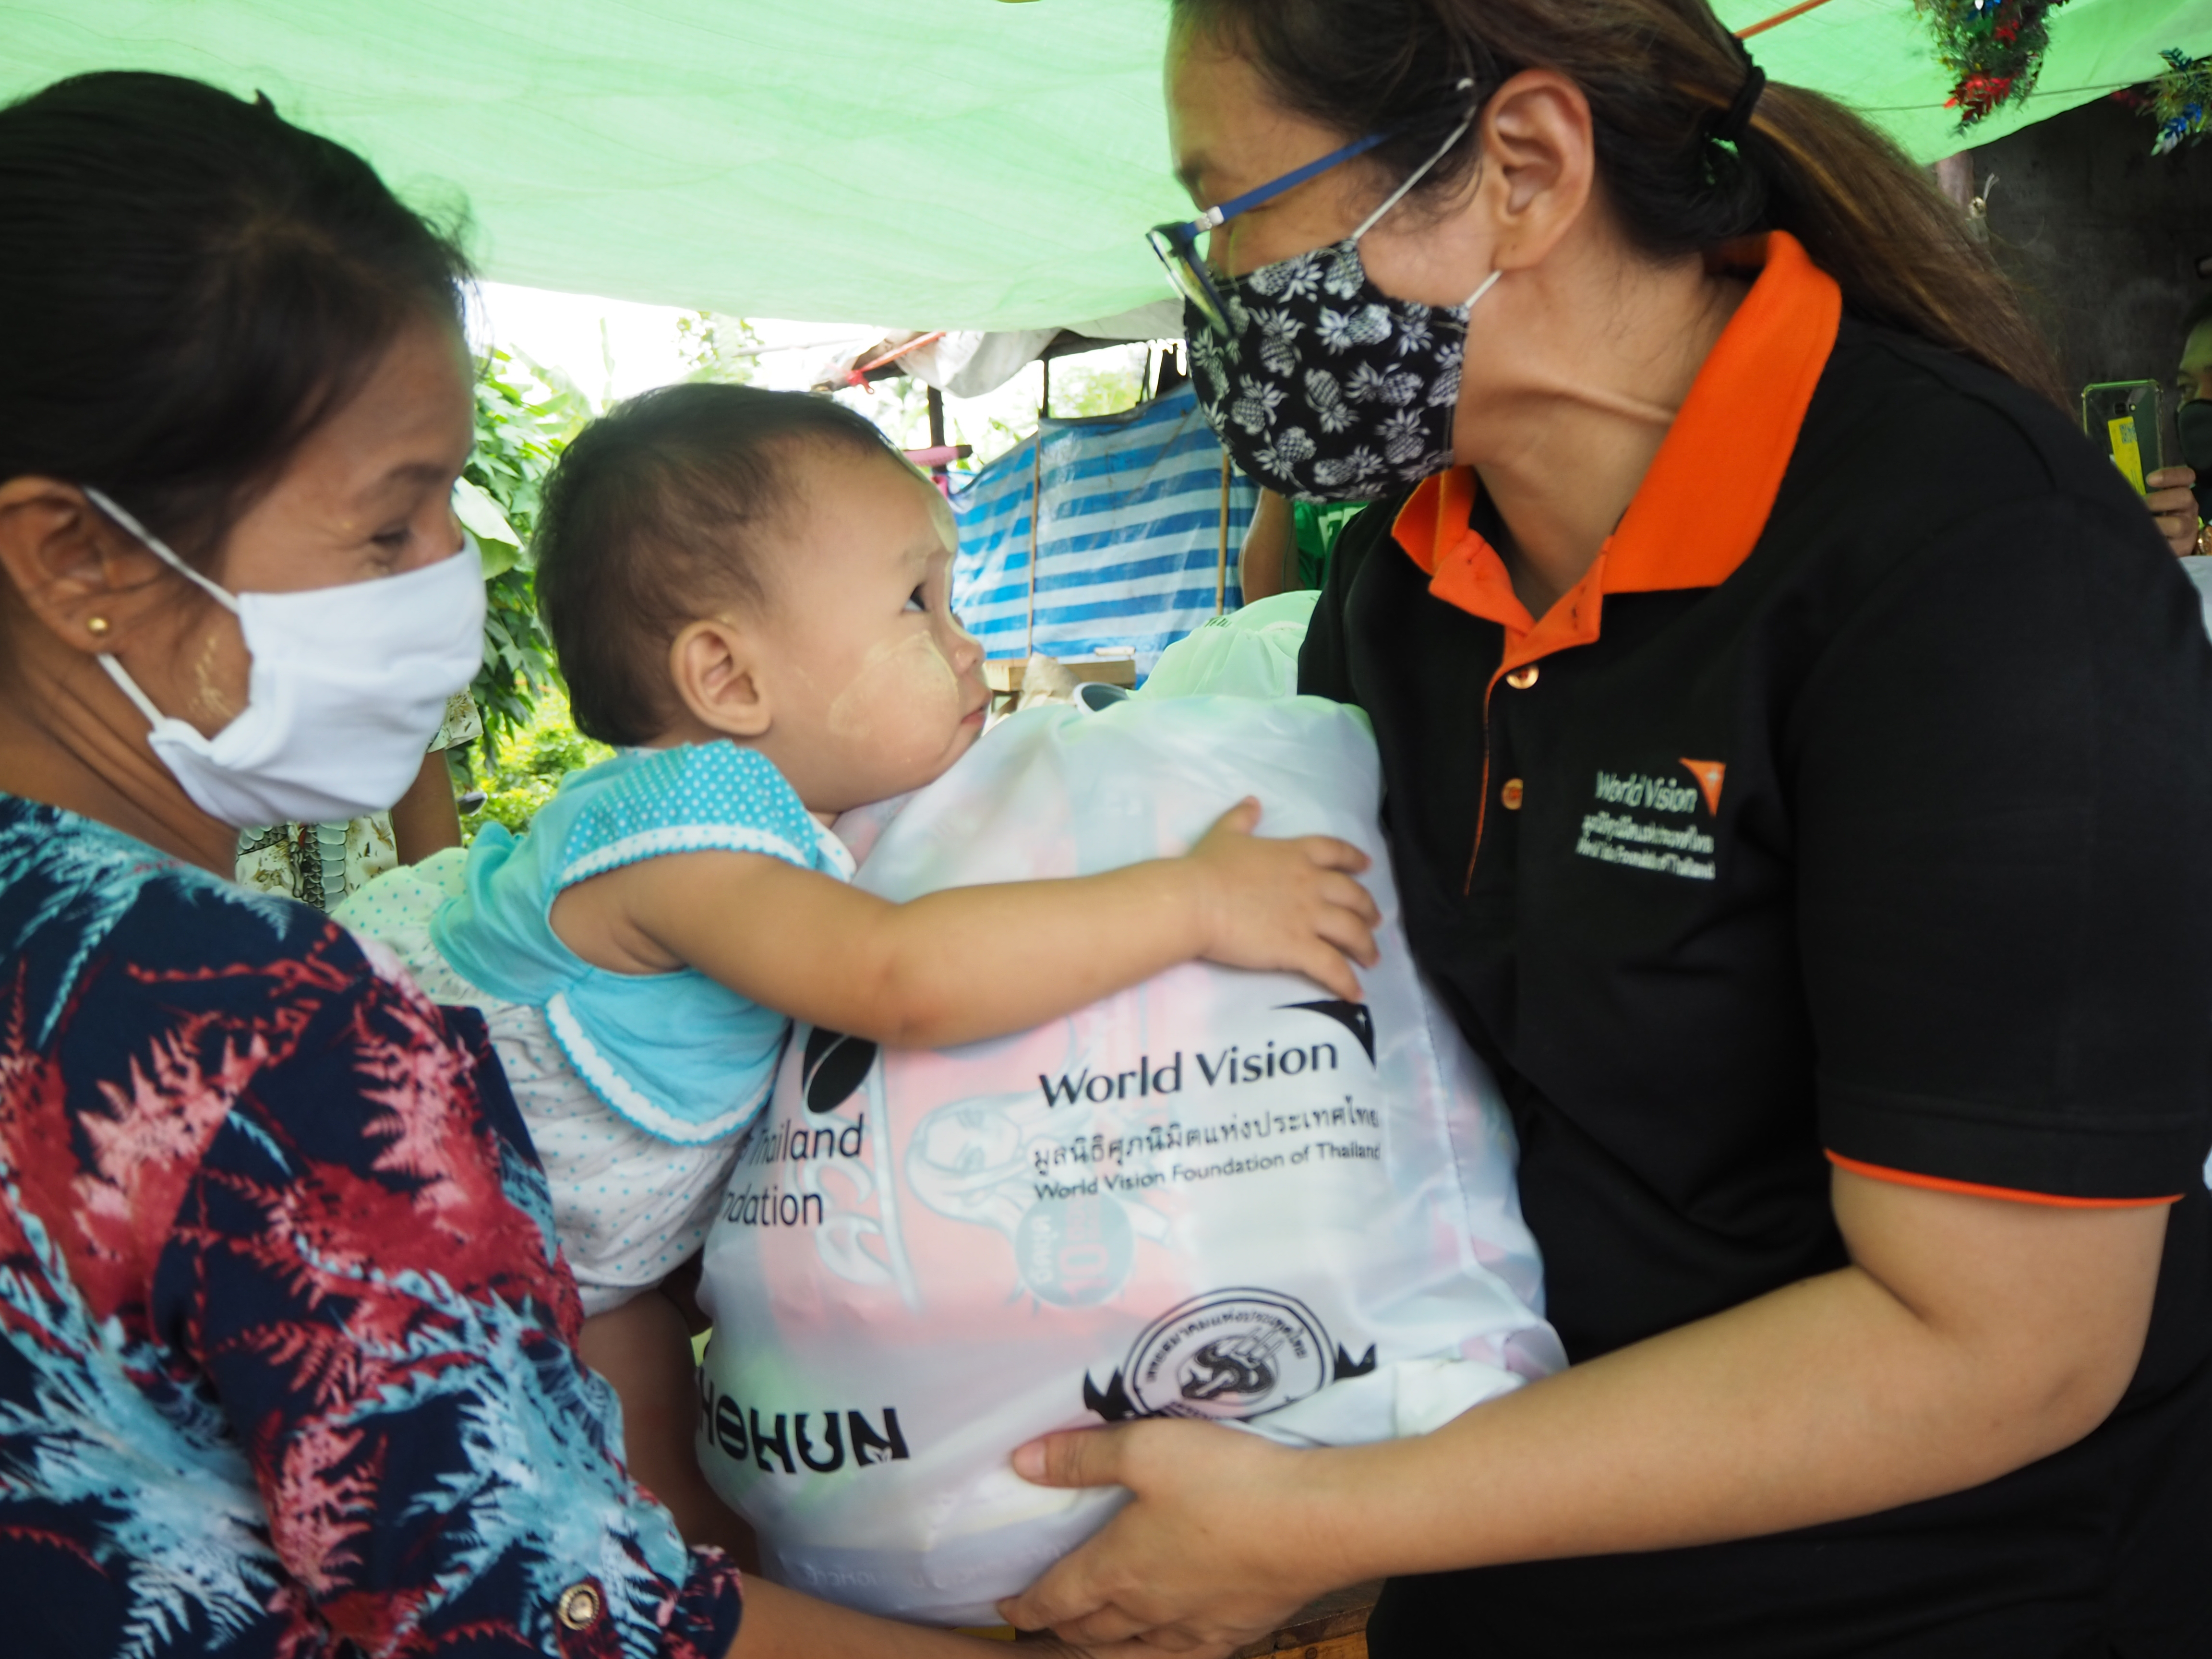 A baby leans forward in her mother's arms to grasp the food aid pack they've been given by World Vision in Myanmar.